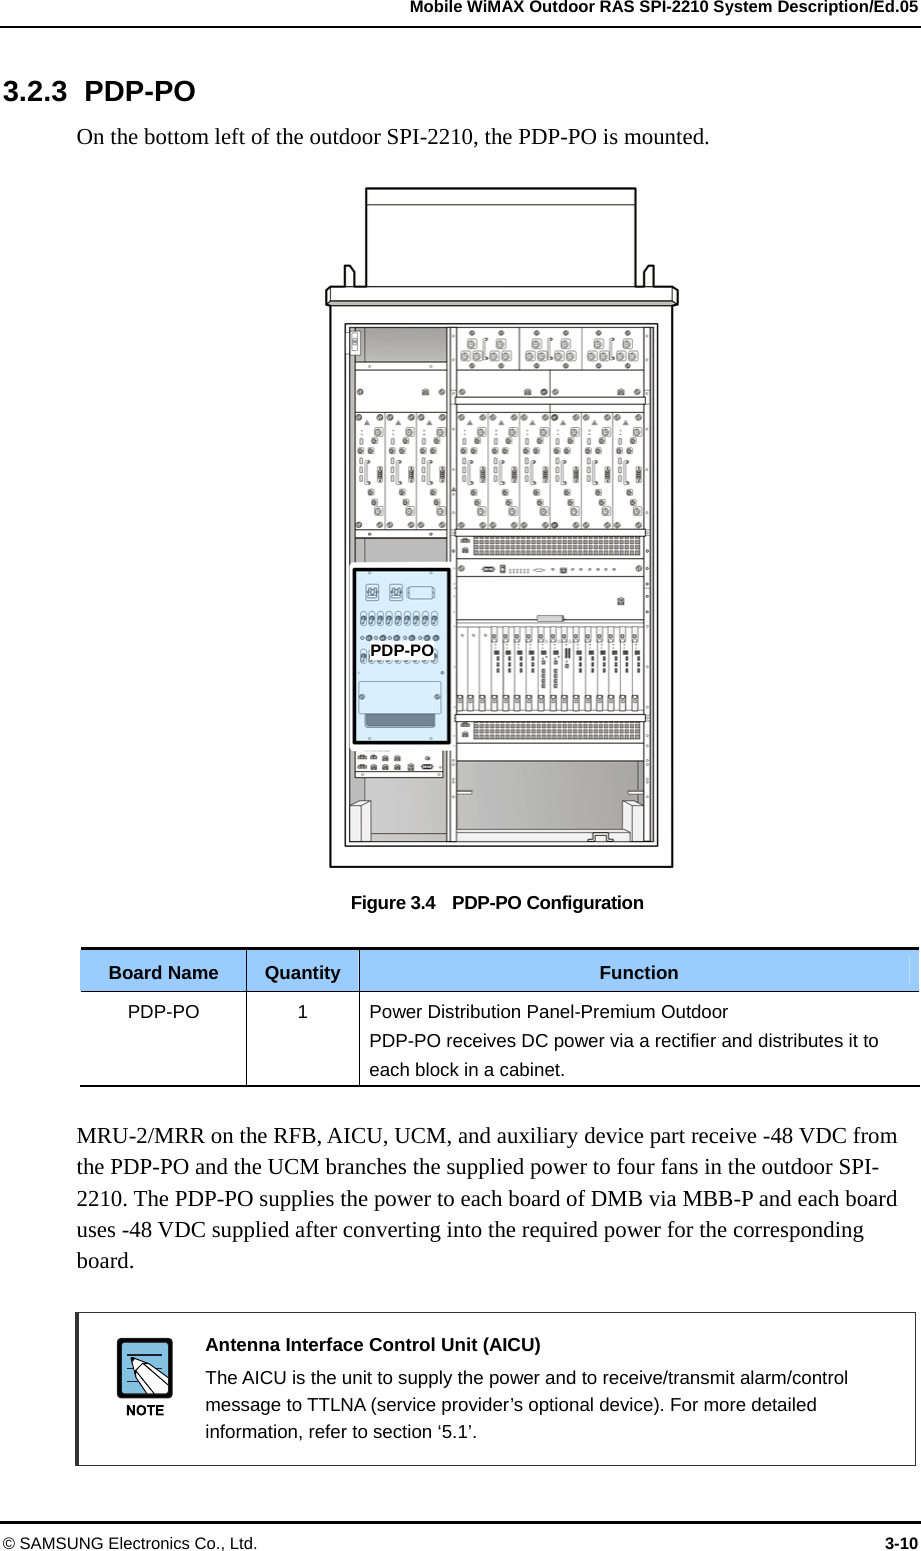   Mobile WiMAX Outdoor RAS SPI-2210 System Description/Ed.05 © SAMSUNG Electronics Co., Ltd.  3-10 3.2.3 PDP-PO On the bottom left of the outdoor SPI-2210, the PDP-PO is mounted.  Figure 3.4    PDP-PO Configuration  Board Name  Quantity  Function PDP-PO 1  Power Distribution Panel-Premium Outdoor PDP-PO receives DC power via a rectifier and distributes it to each block in a cabinet.  MRU-2/MRR on the RFB, AICU, UCM, and auxiliary device part receive -48 VDC from the PDP-PO and the UCM branches the supplied power to four fans in the outdoor SPI-2210. The PDP-PO supplies the power to each board of DMB via MBB-P and each board uses -48 VDC supplied after converting into the required power for the corresponding board.   Antenna Interface Control Unit (AICU)   The AICU is the unit to supply the power and to receive/transmit alarm/control message to TTLNA (service provider’s optional device). For more detailed information, refer to section ‘5.1’. PDP-PO 